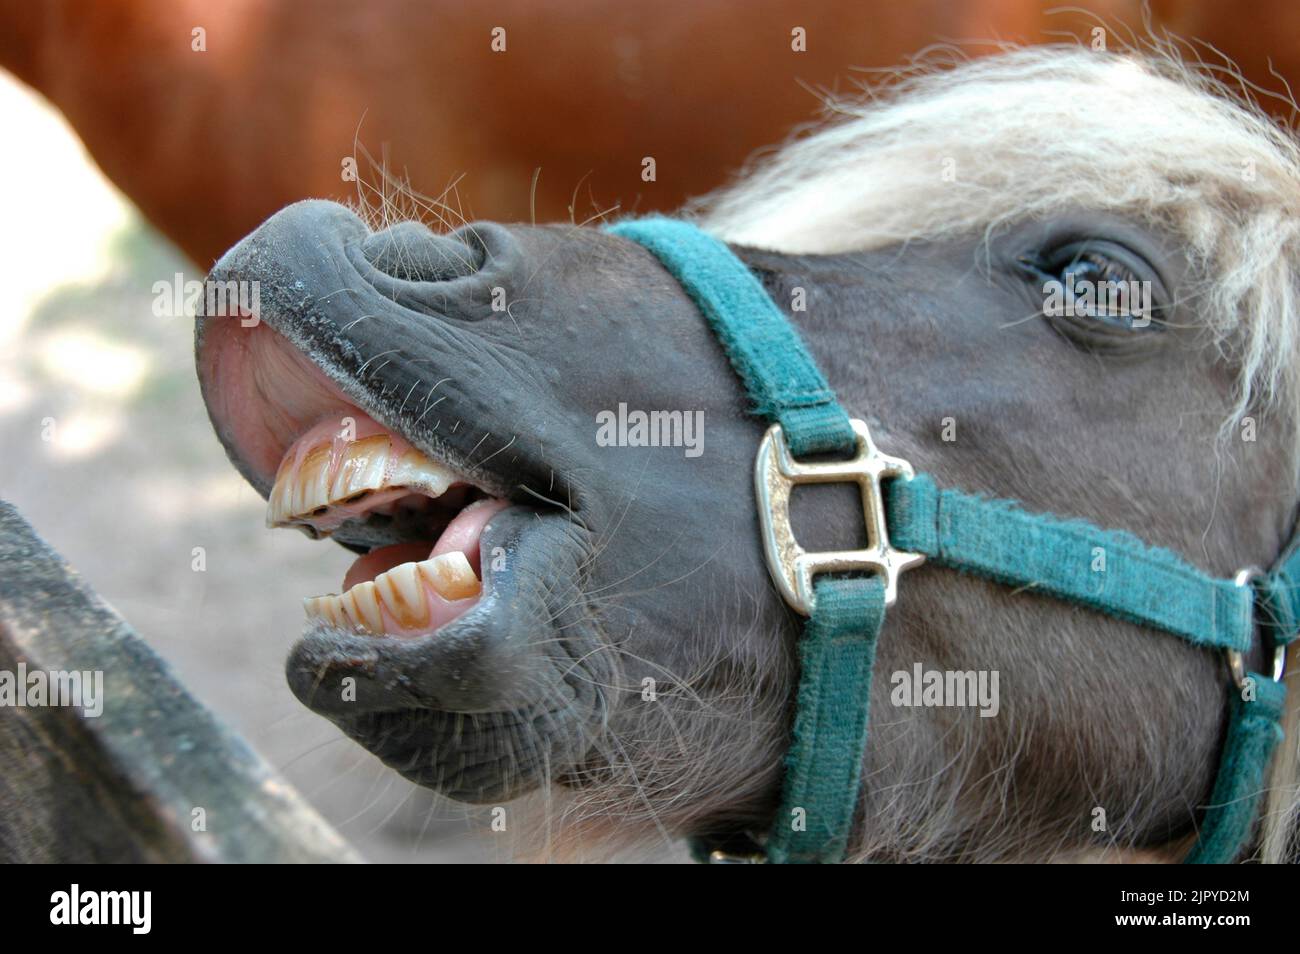 Smiling Horse Pony with dirty teeth Stock Photo